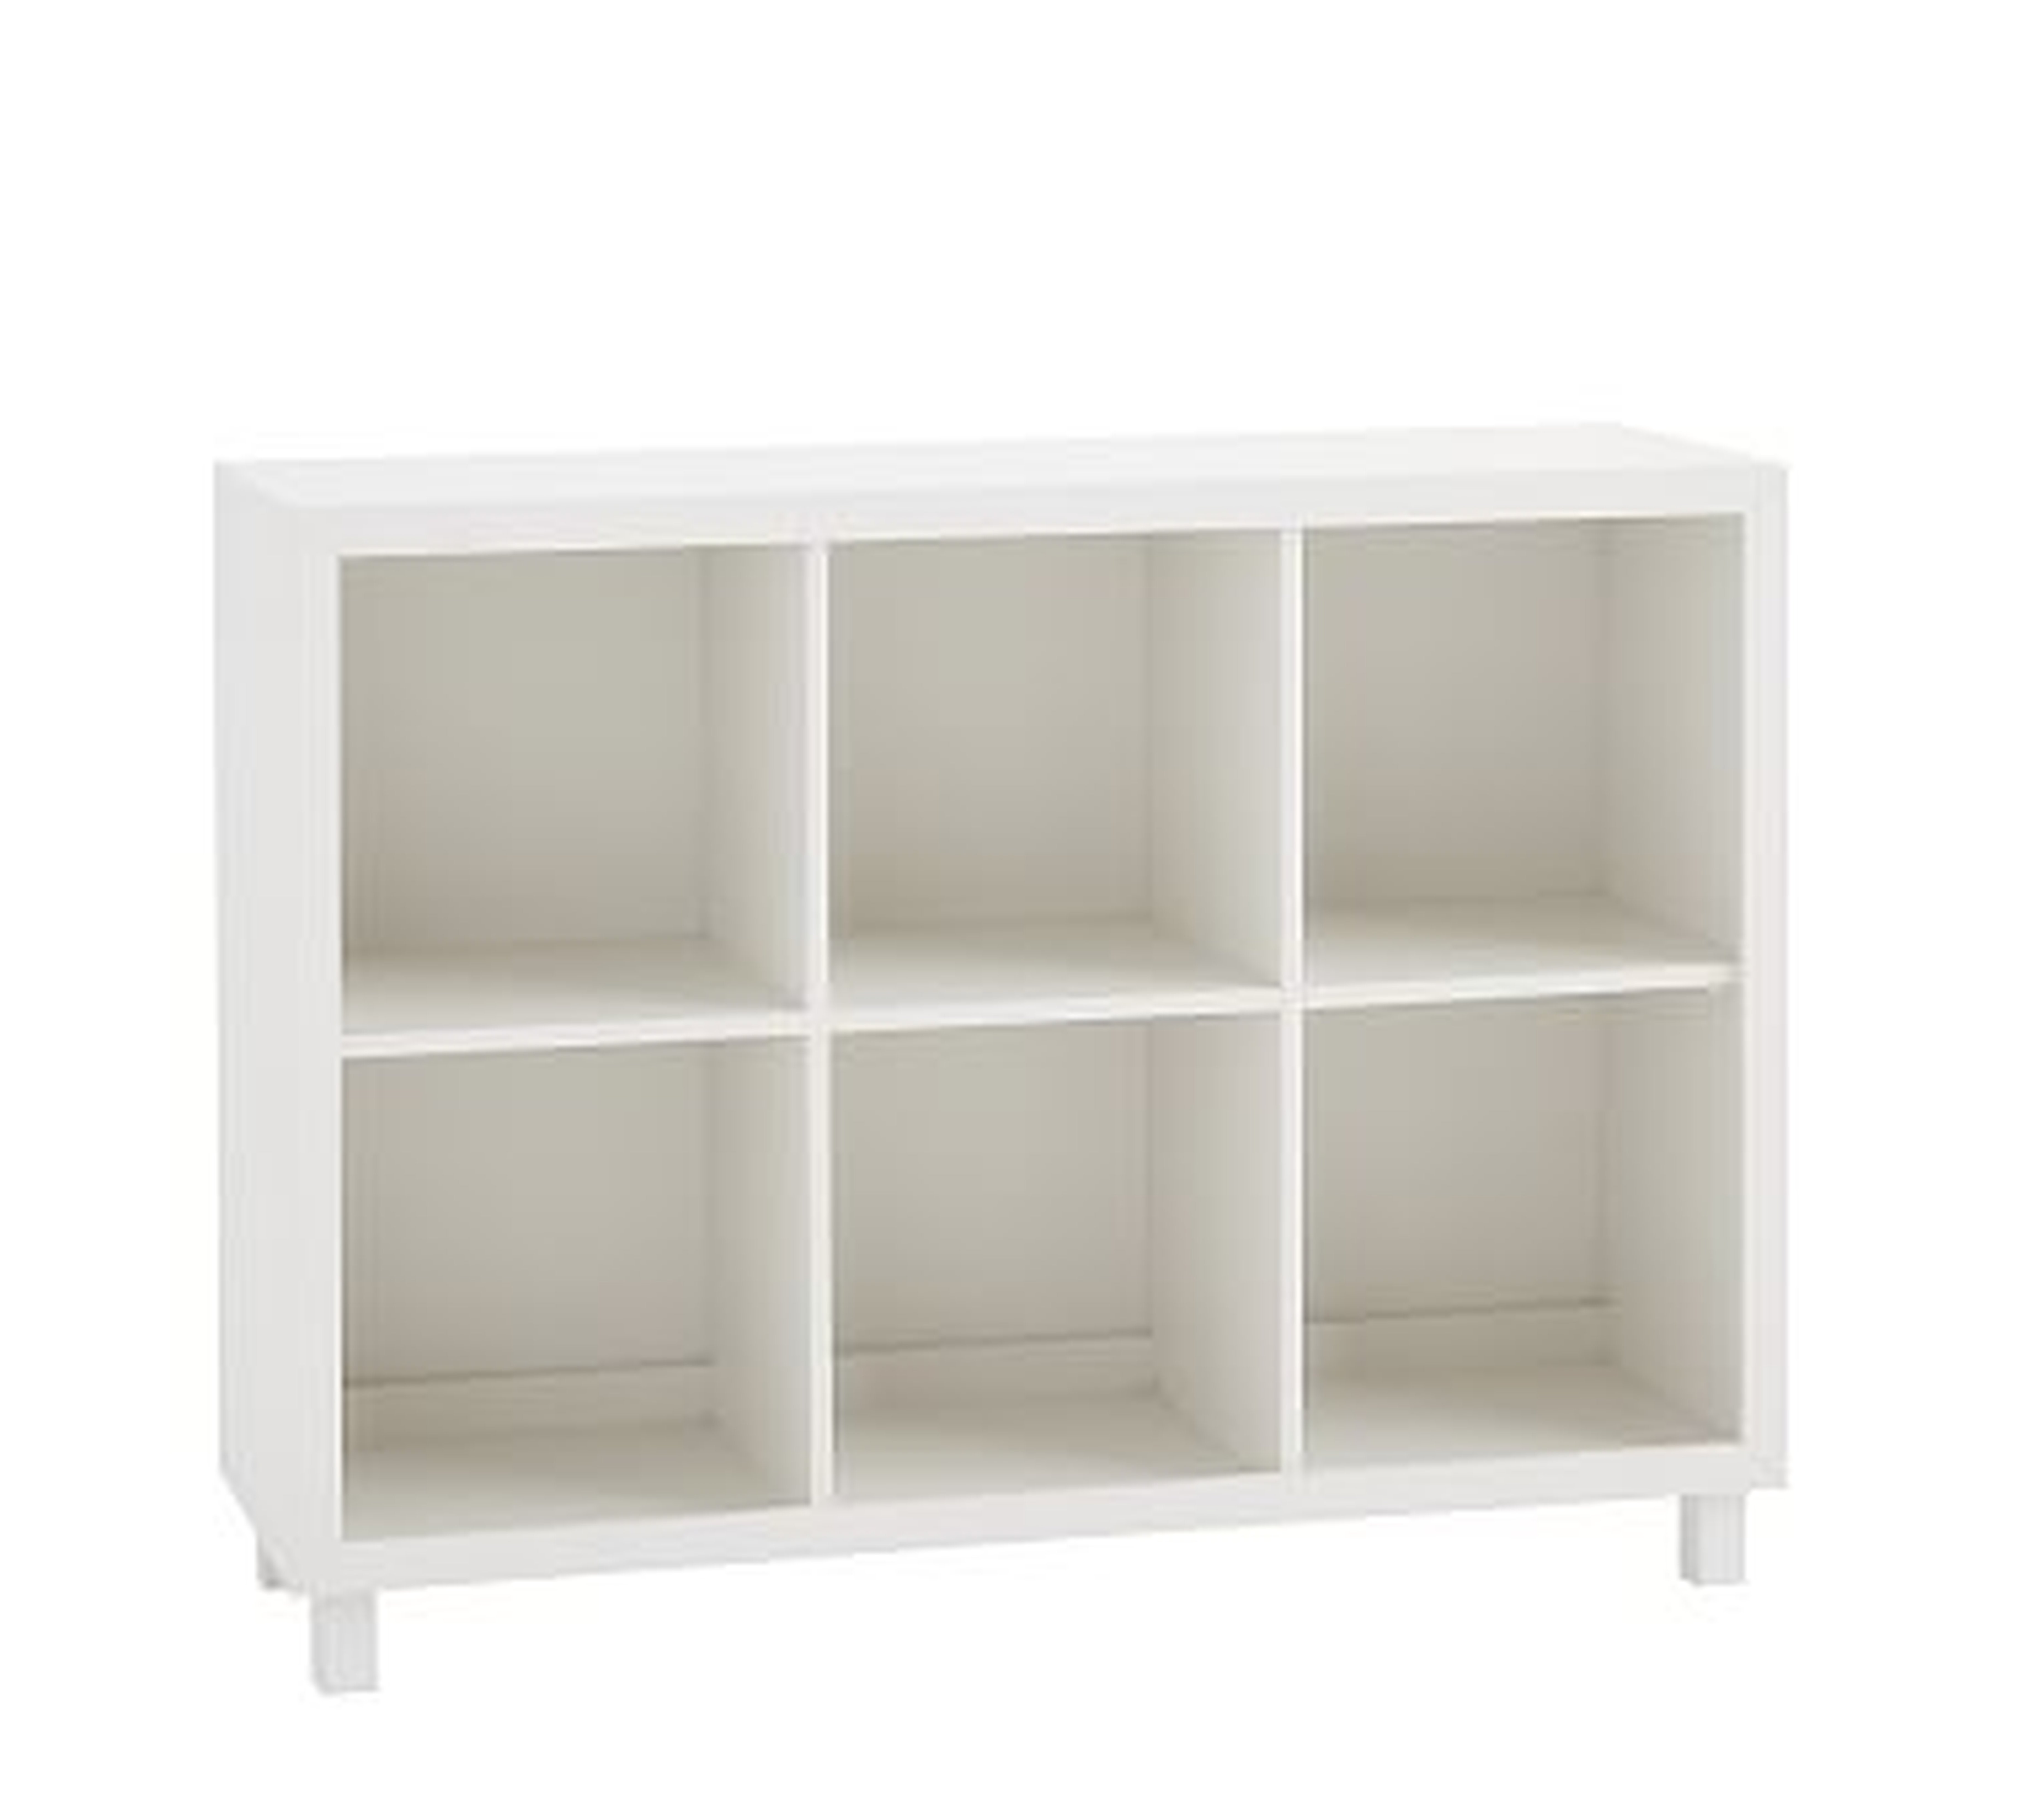 Horizontal Cubby Bookcase, Simply White - Pottery Barn Kids